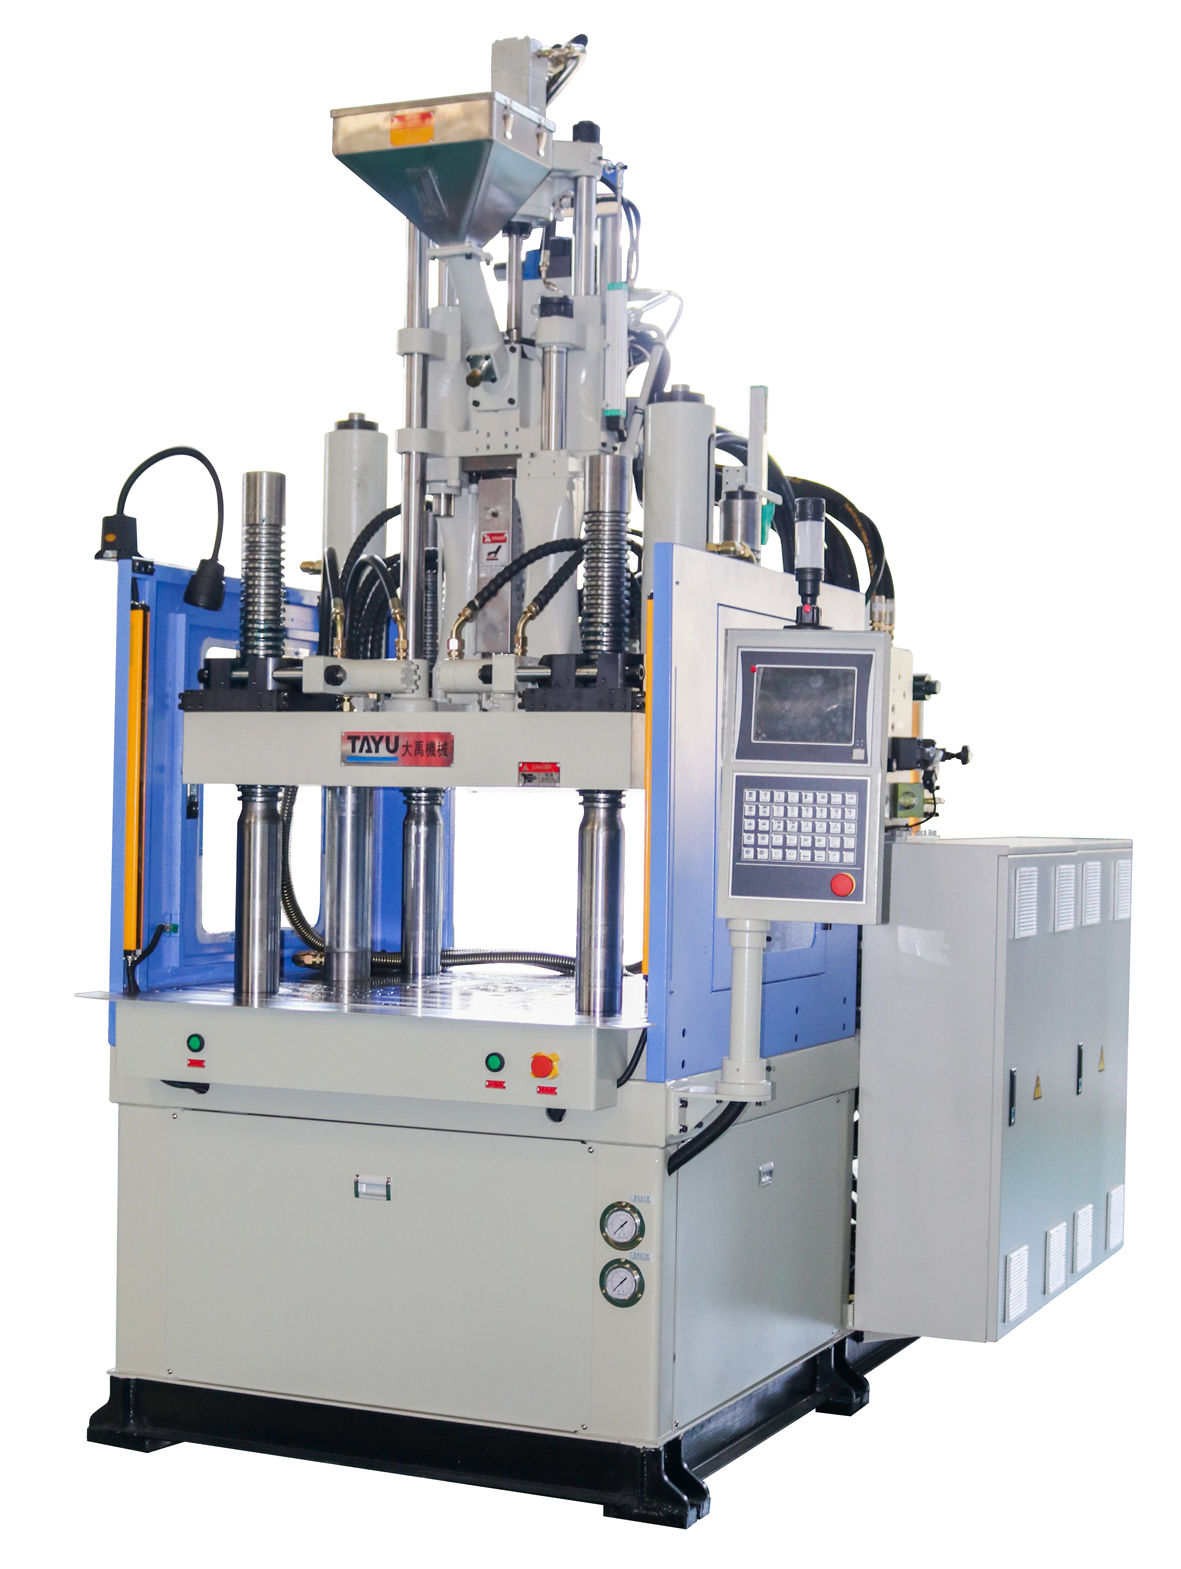 TYM-1600 vertical injection molding machine